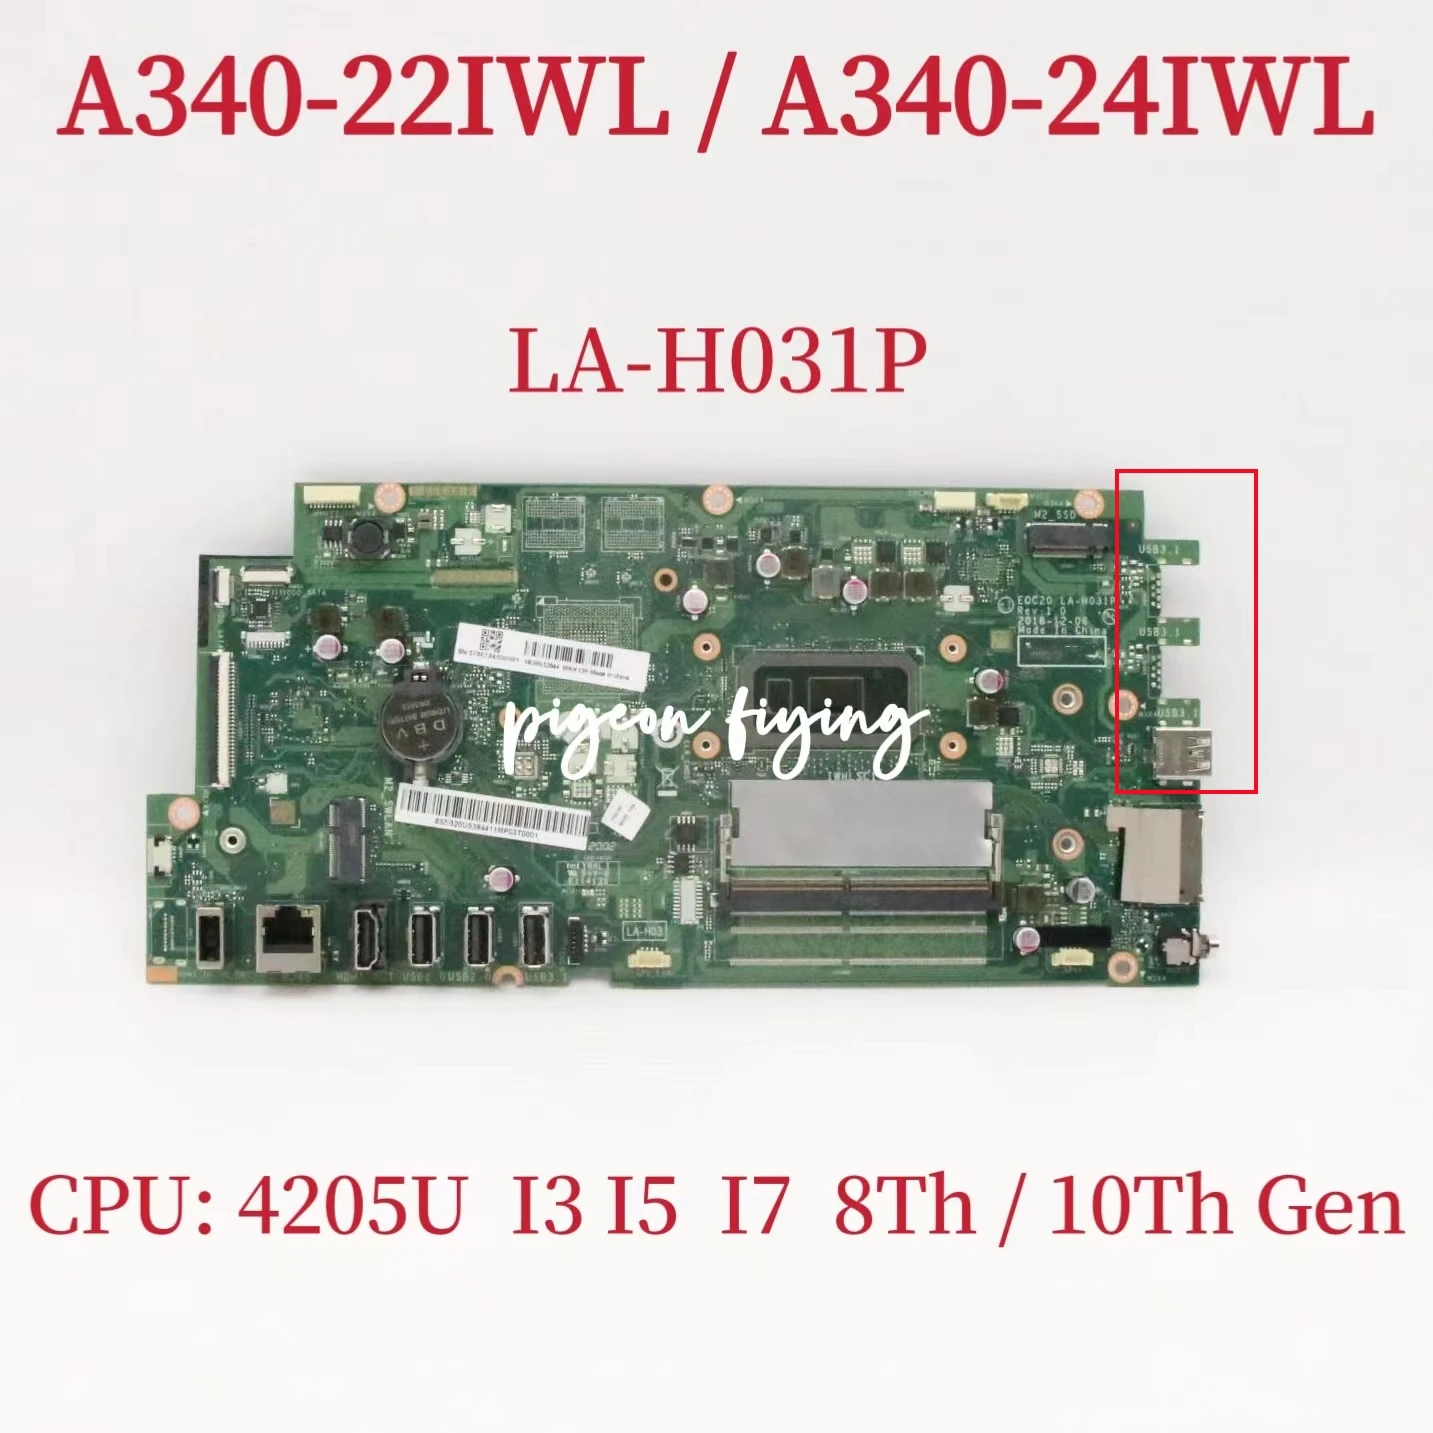 

LA-H031P Mainboard For Ideacentre A340-22IWL / A340-24IWL Laptop Motherboard With 4205U I3 I5 I7 8Th /10Th Gen CPU 100% Test OK